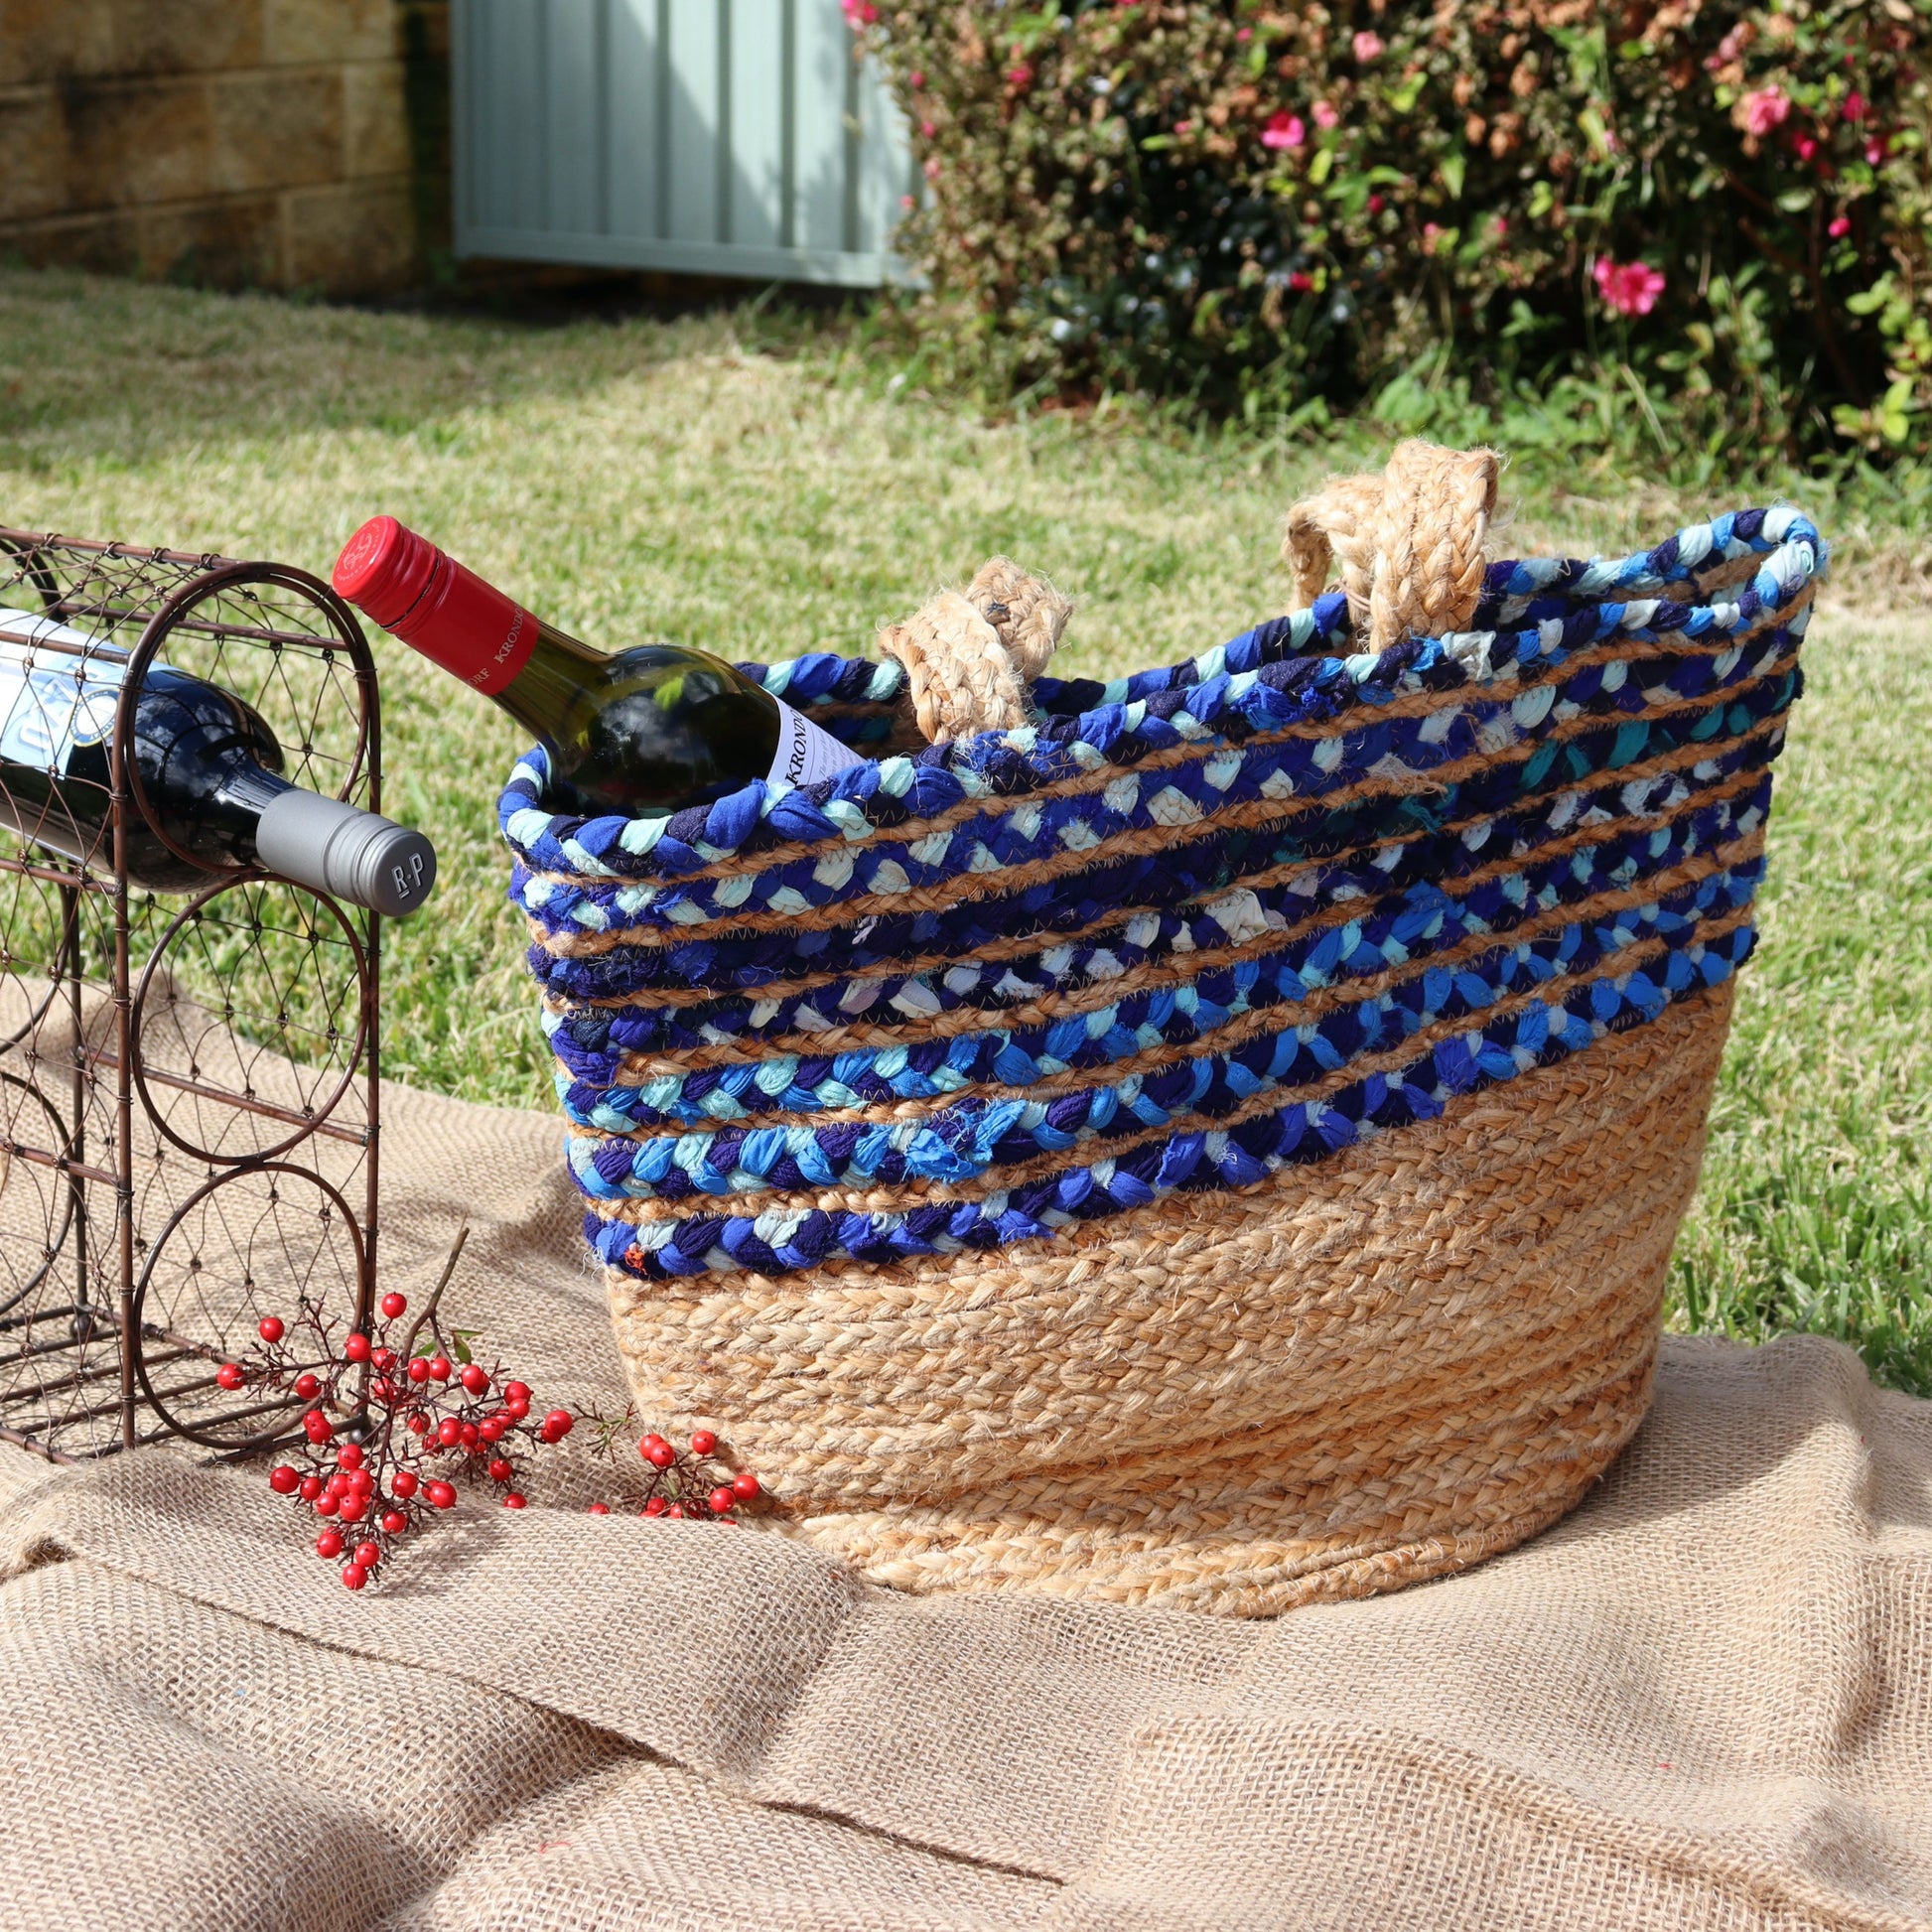 Blue Cloth & Jute Tote Bag - Handmade, Ethical, Upcycled, Repurposed Materials - Aksa Home Decor 